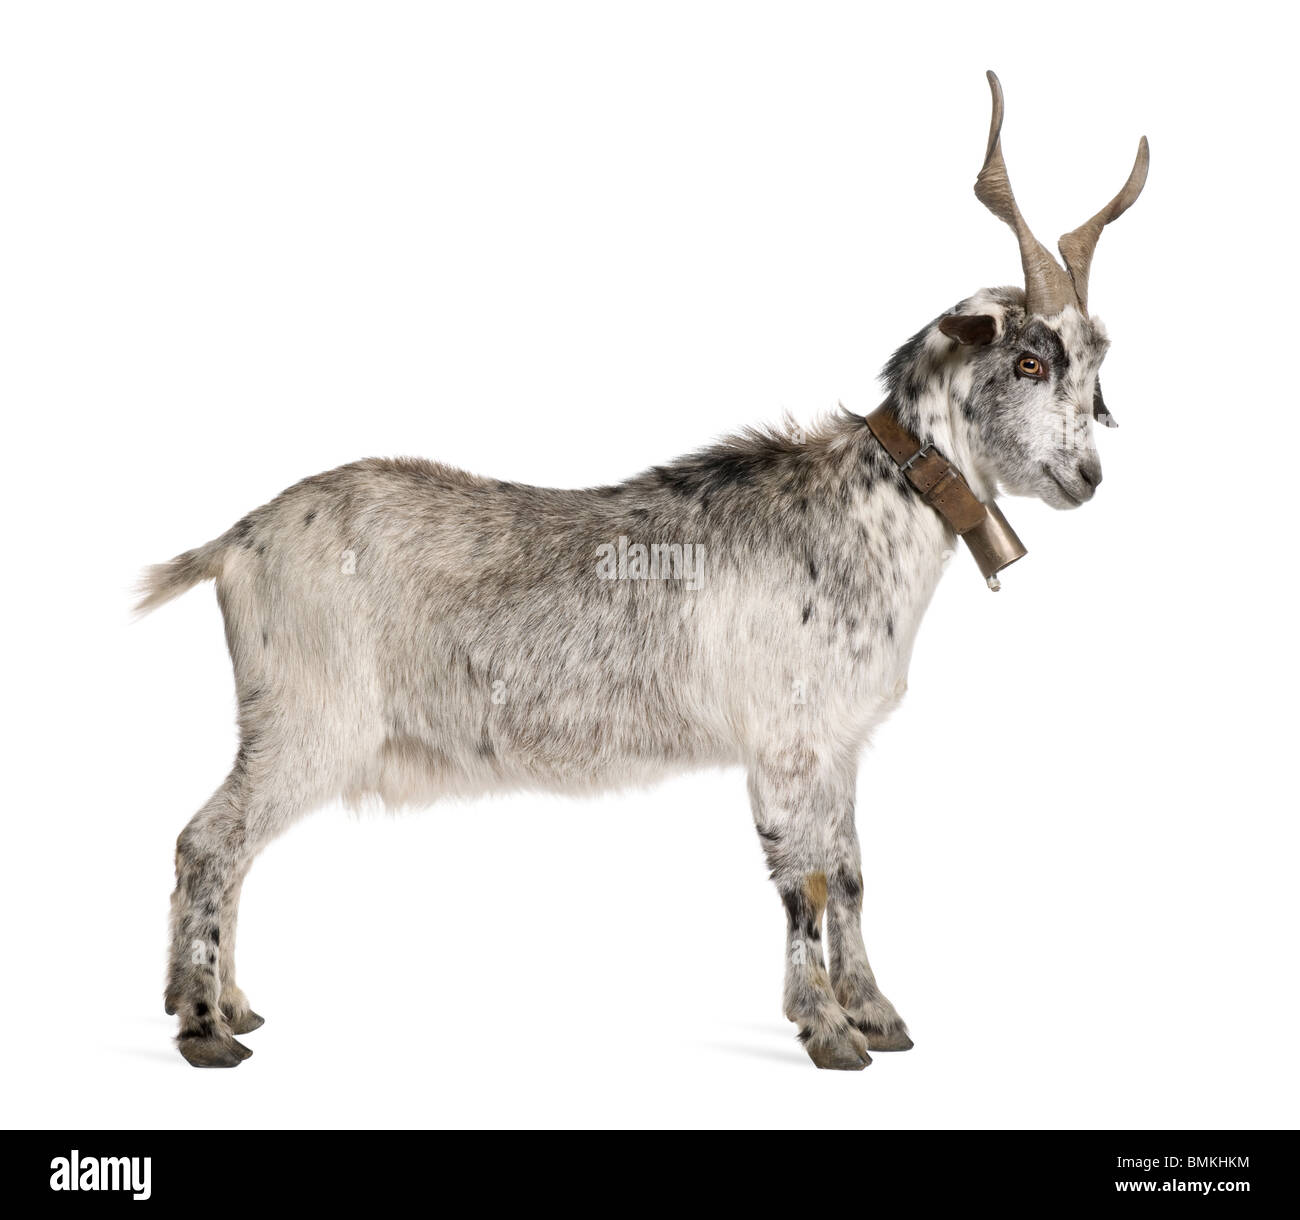 Rove goat, 5 years old, standing in front of white background Stock Photo